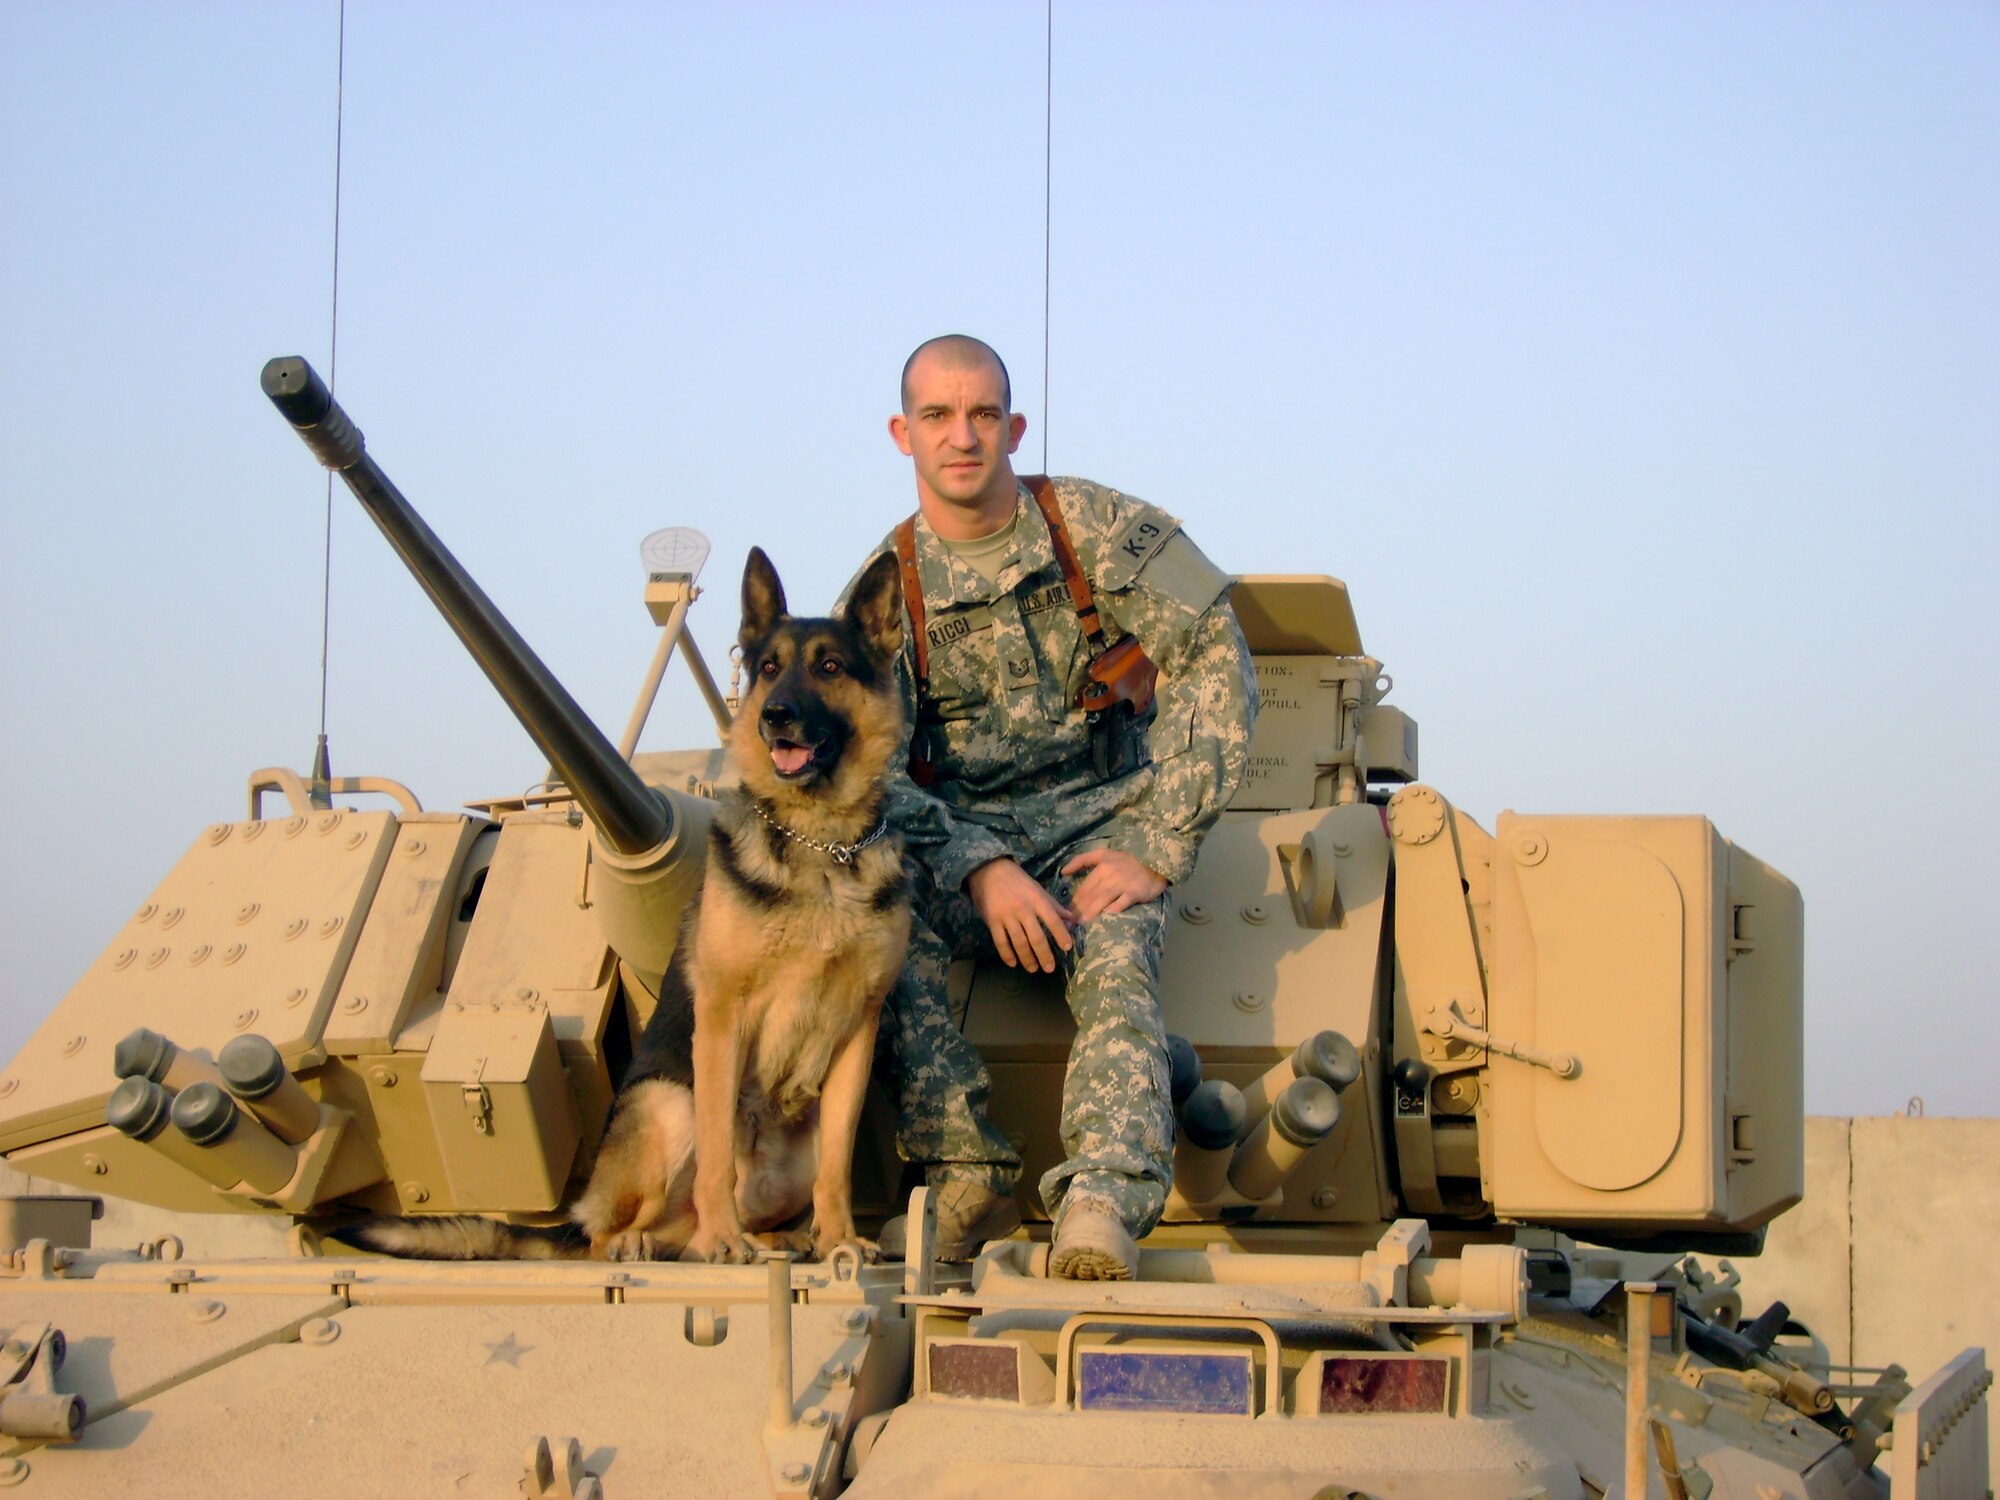 Tech. Sgt. John Ricci, 50th Security Forces Squadron, Schriever, AFB, Colo., and Eddy, a German Shepherd, get a picture together during their deployment to Iraq in 2007. Beginning in 2003, Eddy endured five deployments to Kuwait and Iraq. (Courtesy photo)